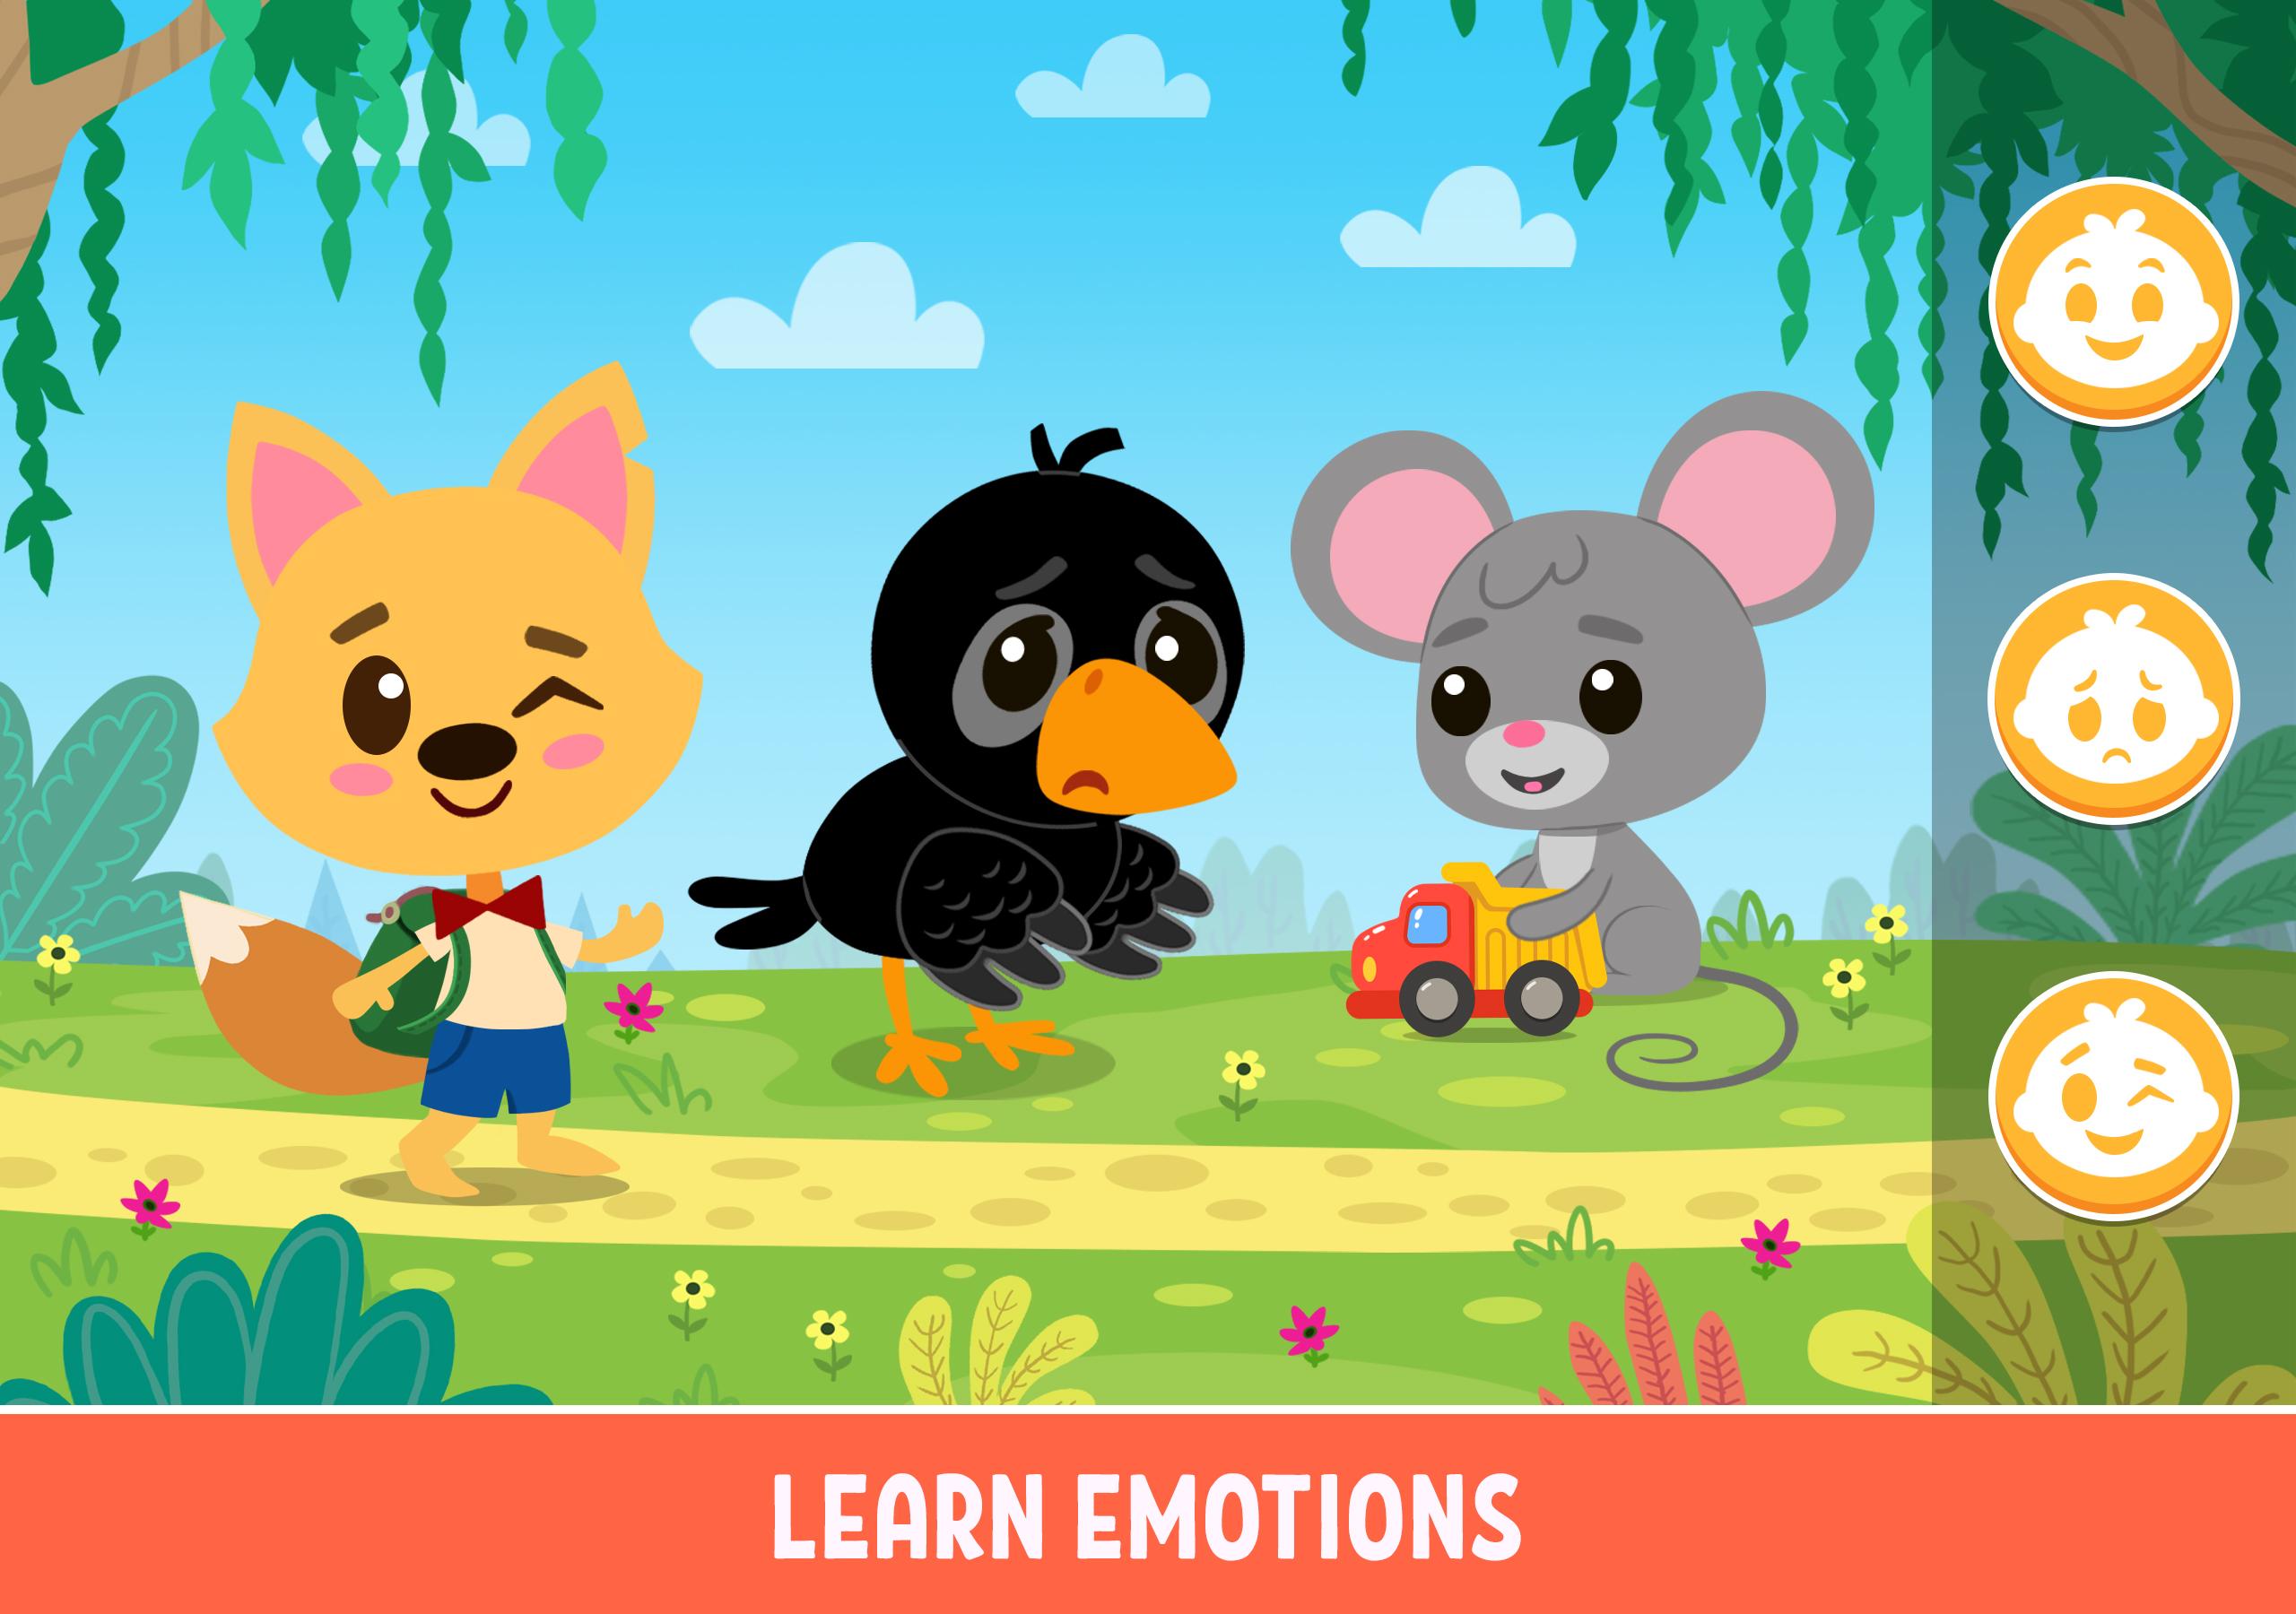 Kids Academy - learning games for toddlers 3.1.3 Screenshot 10